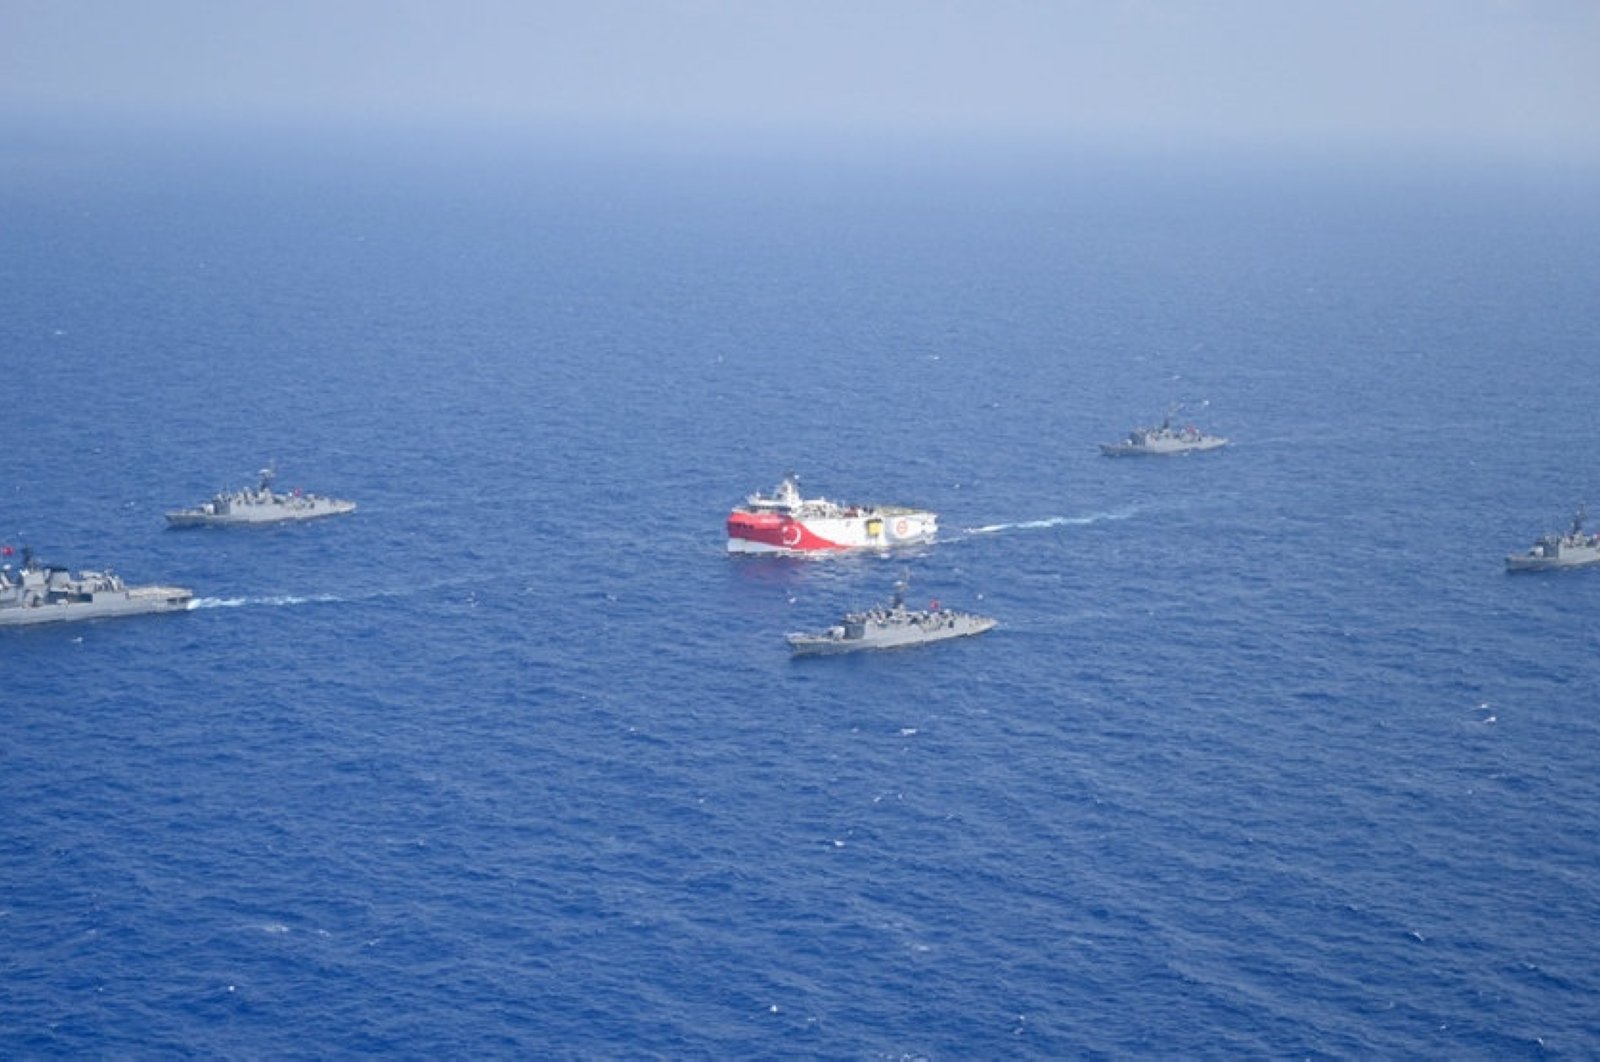 Turkey's research vessel, Oruç Reis, in red and white, is surrounded by Turkish navy vessels as it was heading in the west of Antalya on the eastern Mediterranean, Turkey, Aug 10, 2020. (AP)